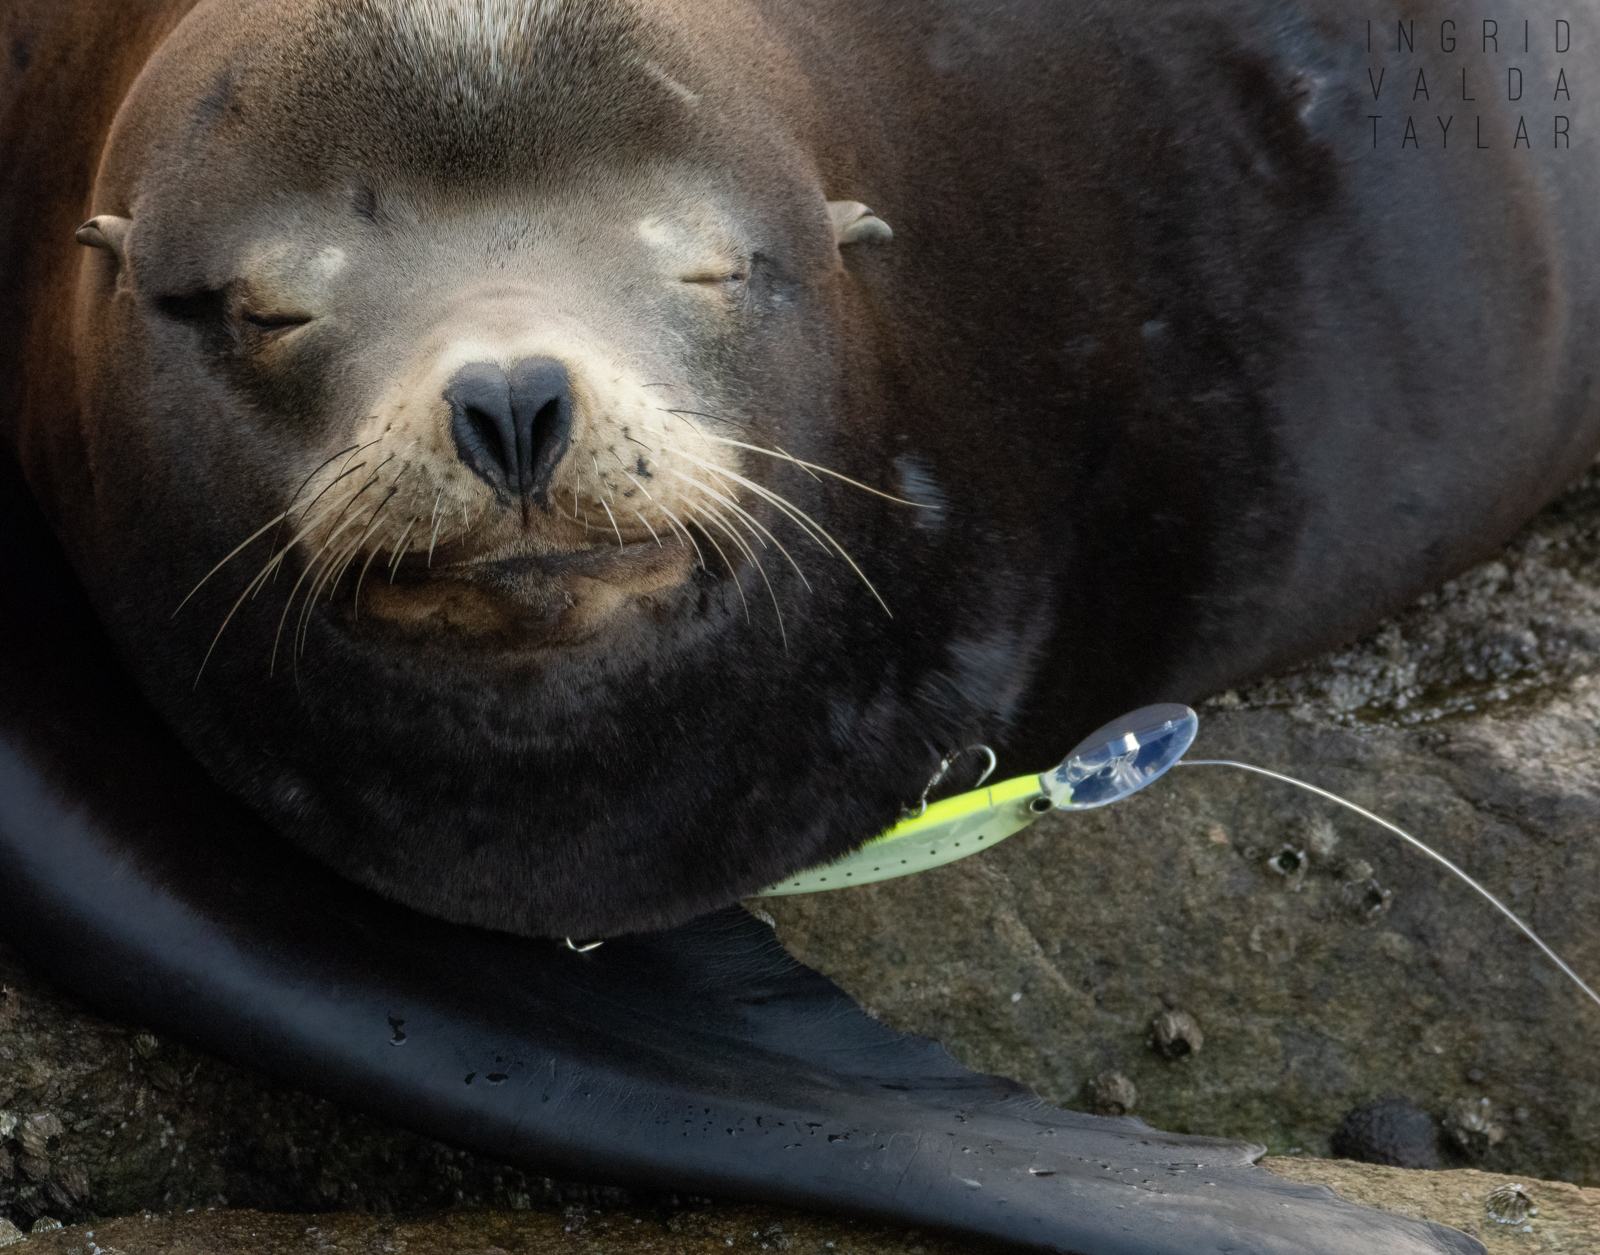 SEA LION WITH EMBEDDED HOOK/LURE